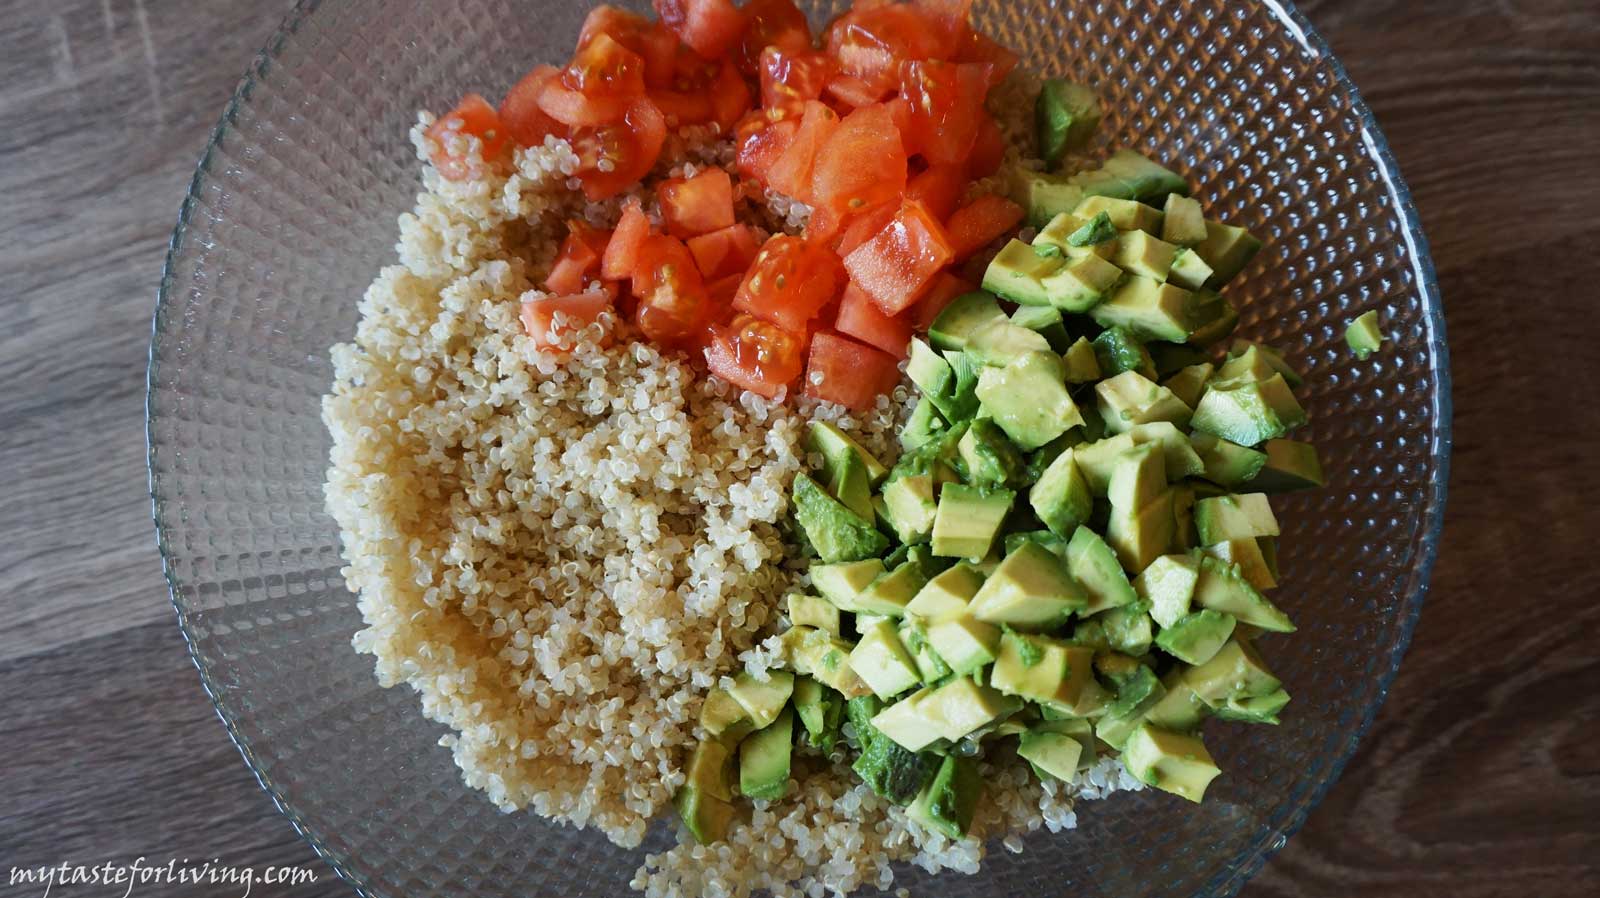 Easy and tasty suggestion for a salad with quinoa, avocado and tomatoes.